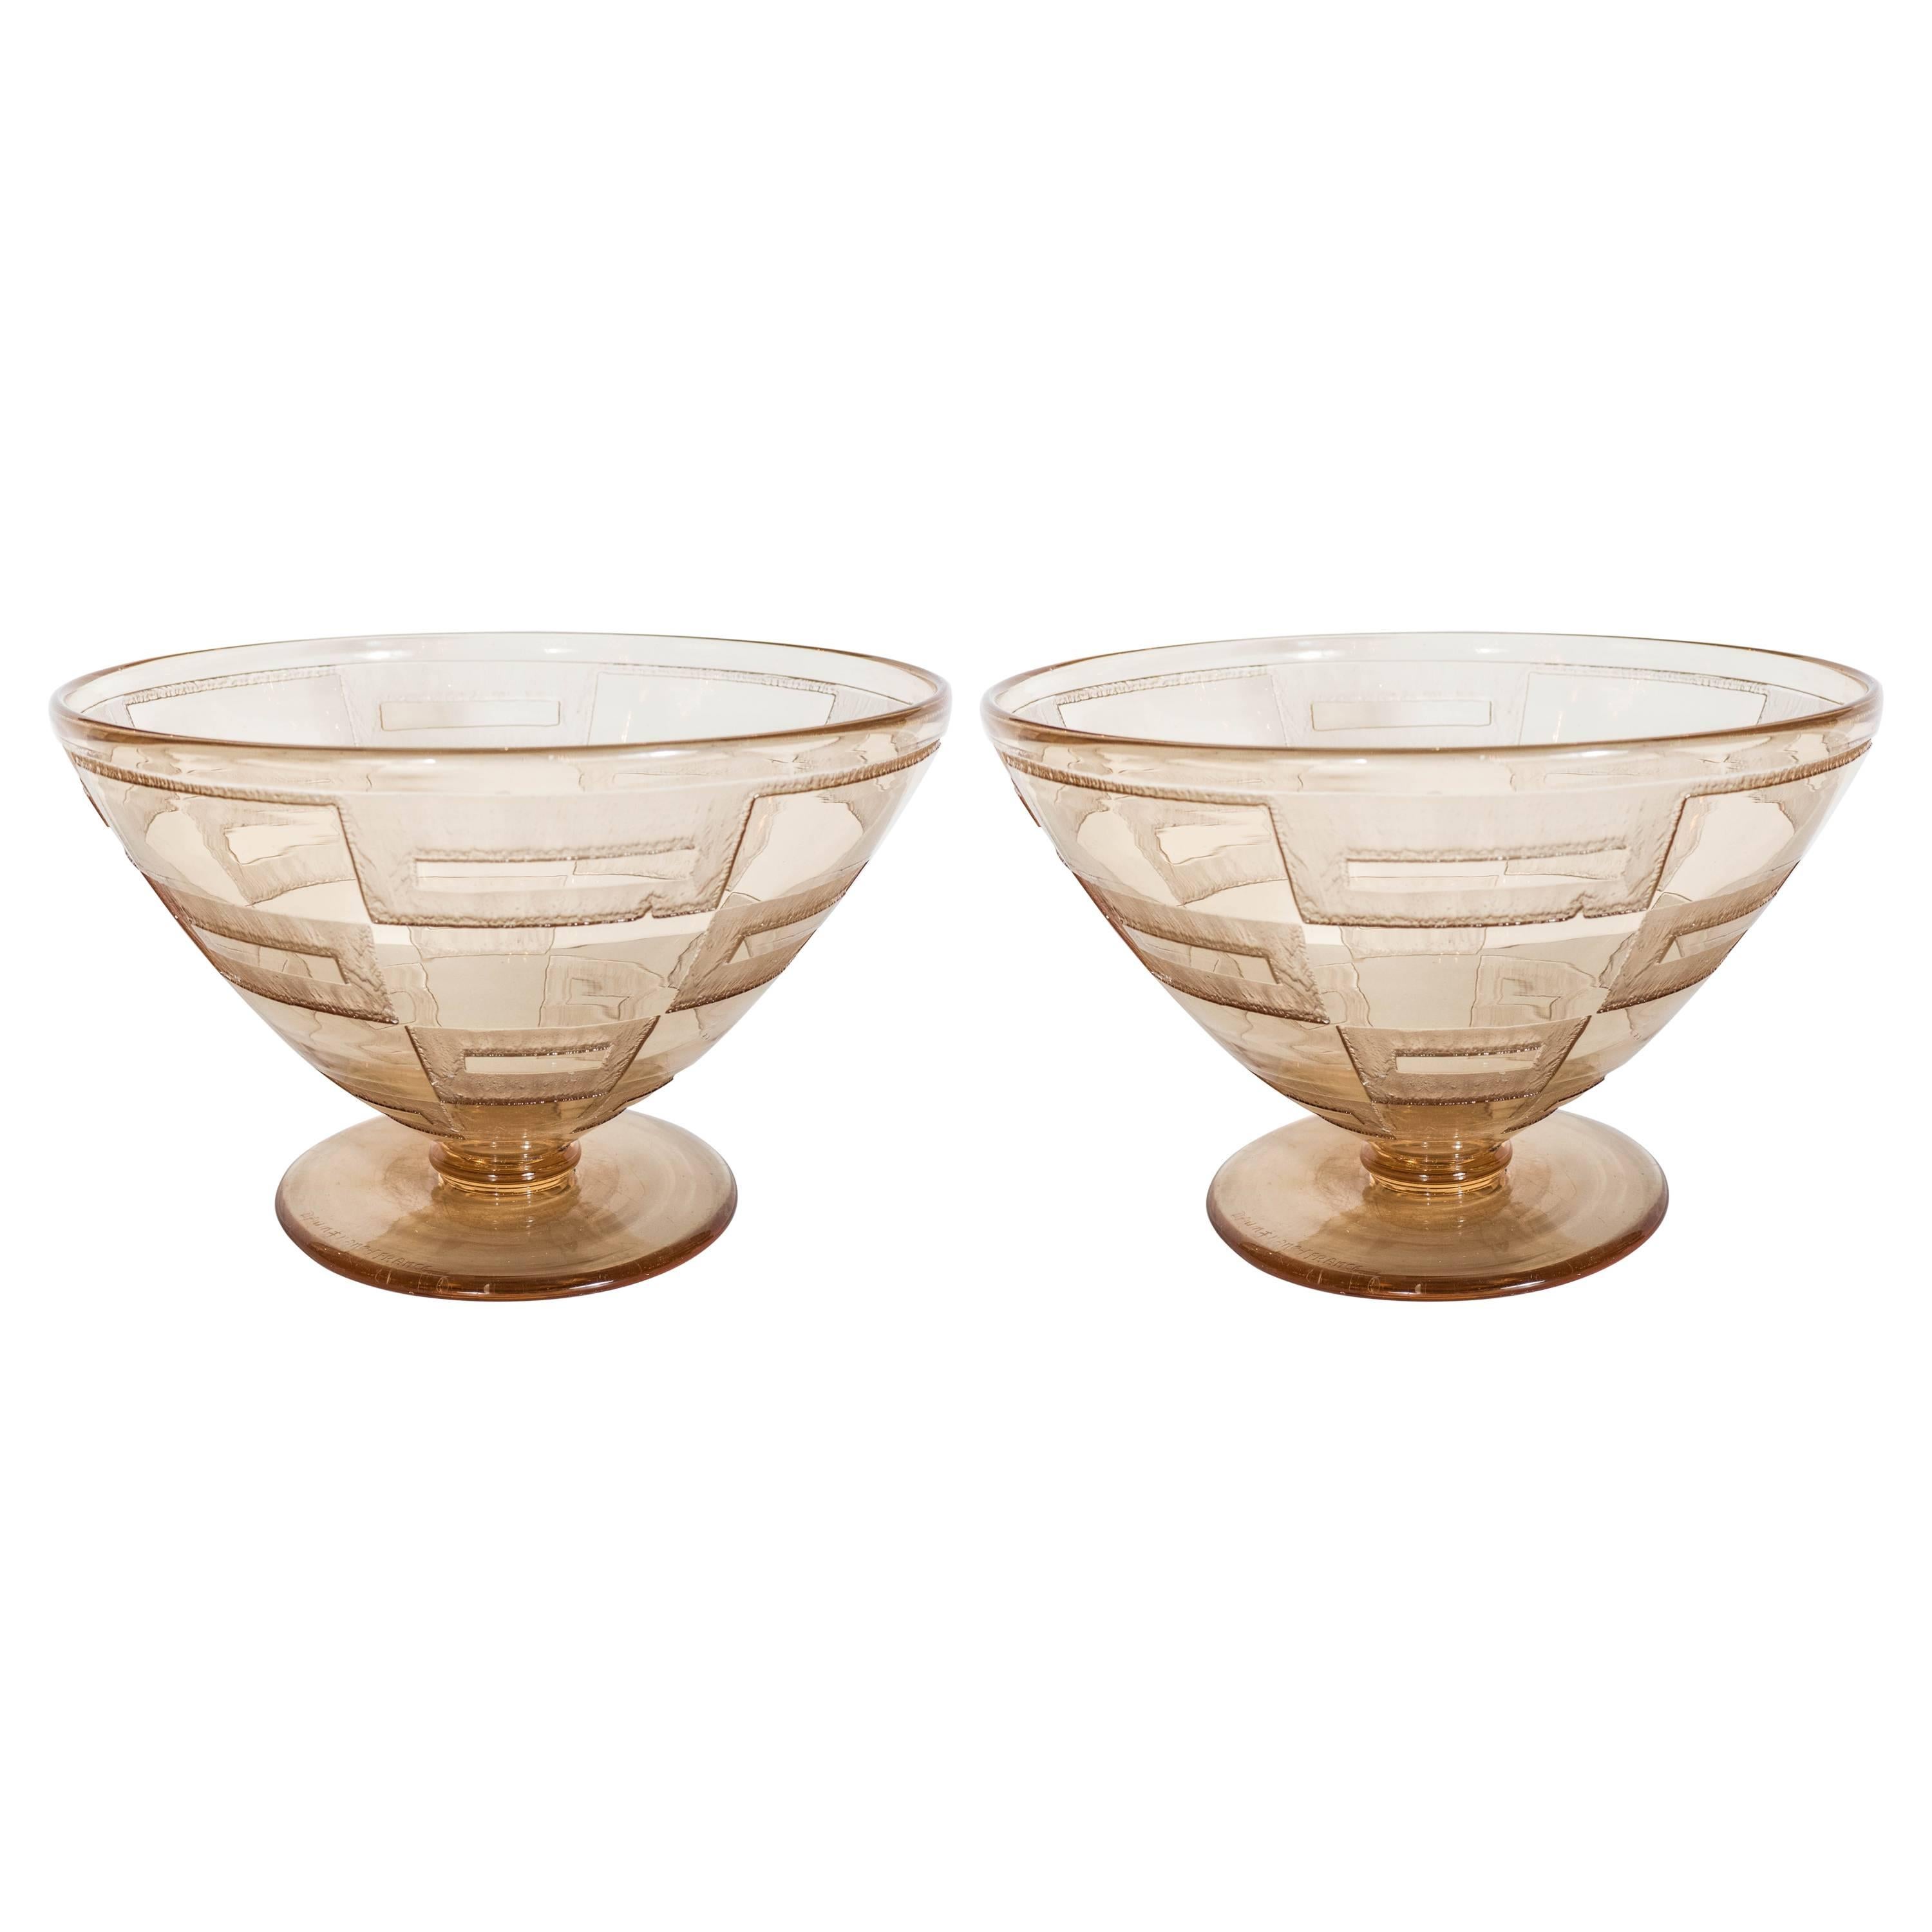 Exquisite Pair of Art Deco Acid-Etched Glass Footed Bowls by Nancy Daum 